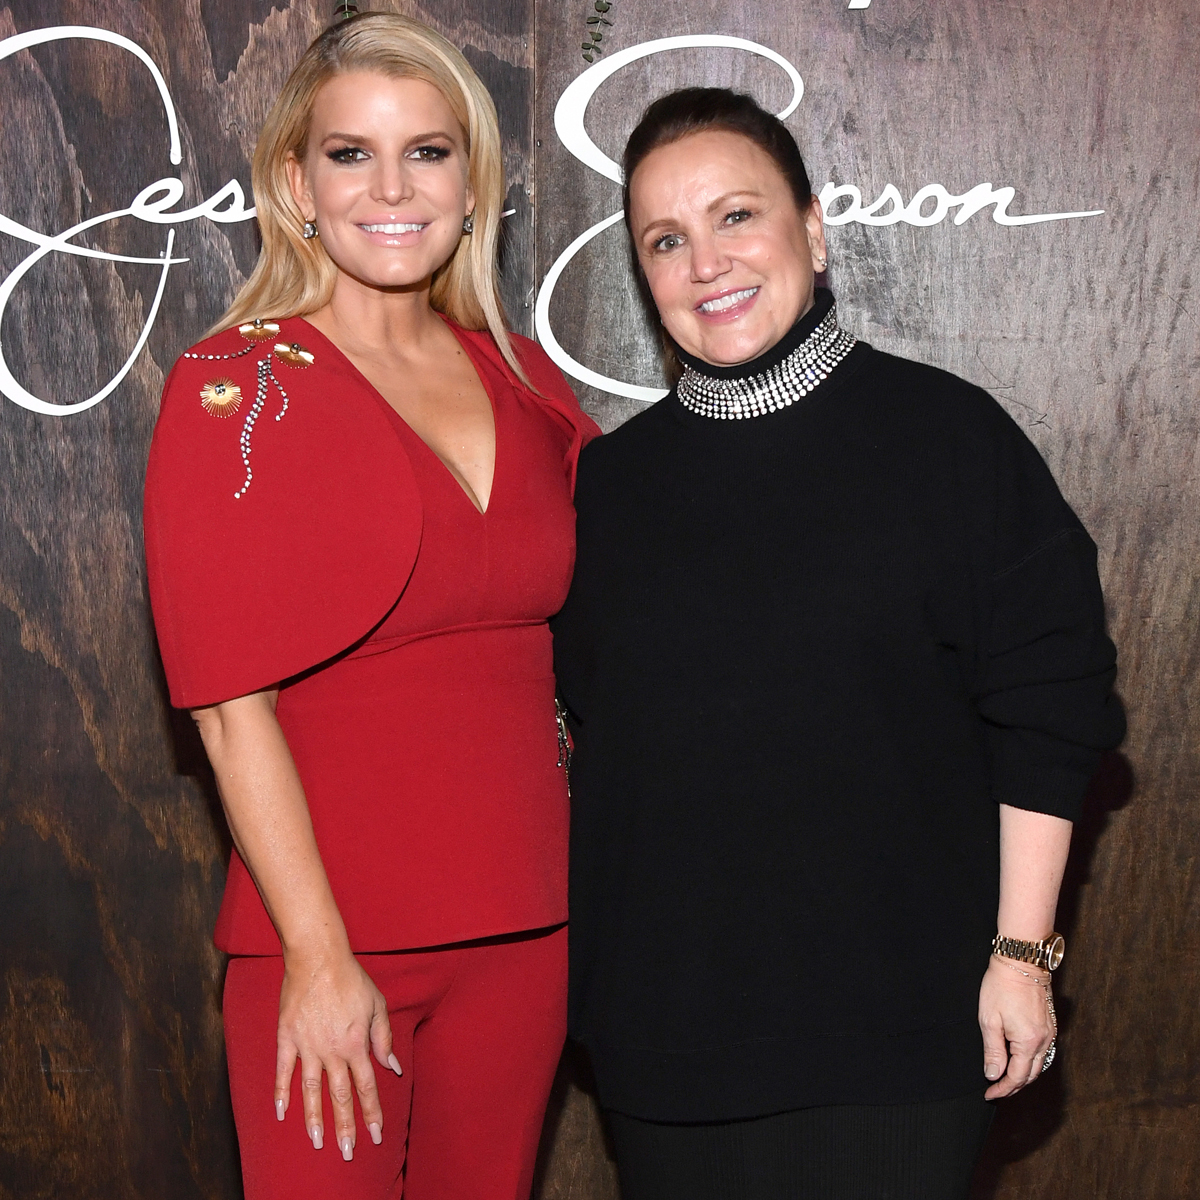 Jessica Simpson Wanted to Be a Recluse After Body Shaming, Mom Says